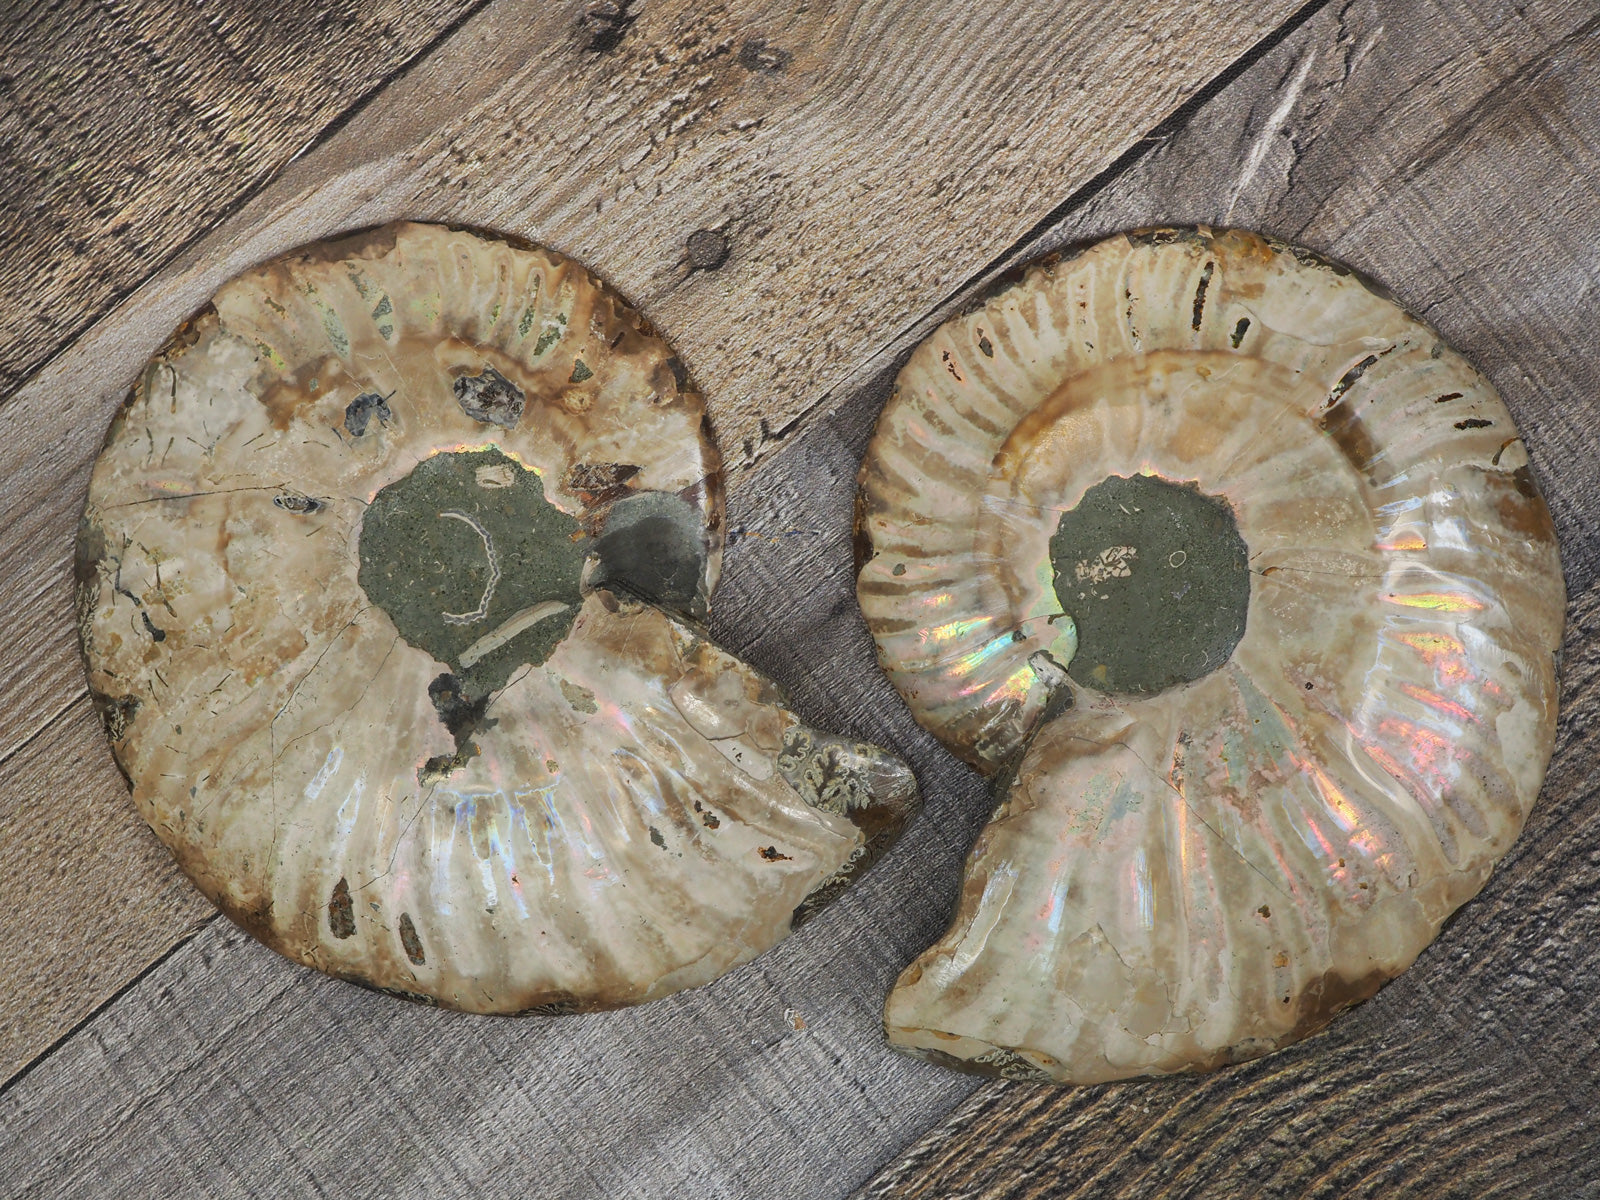 5.25" Orange Agatized Ammonite Fossil Pair from the back